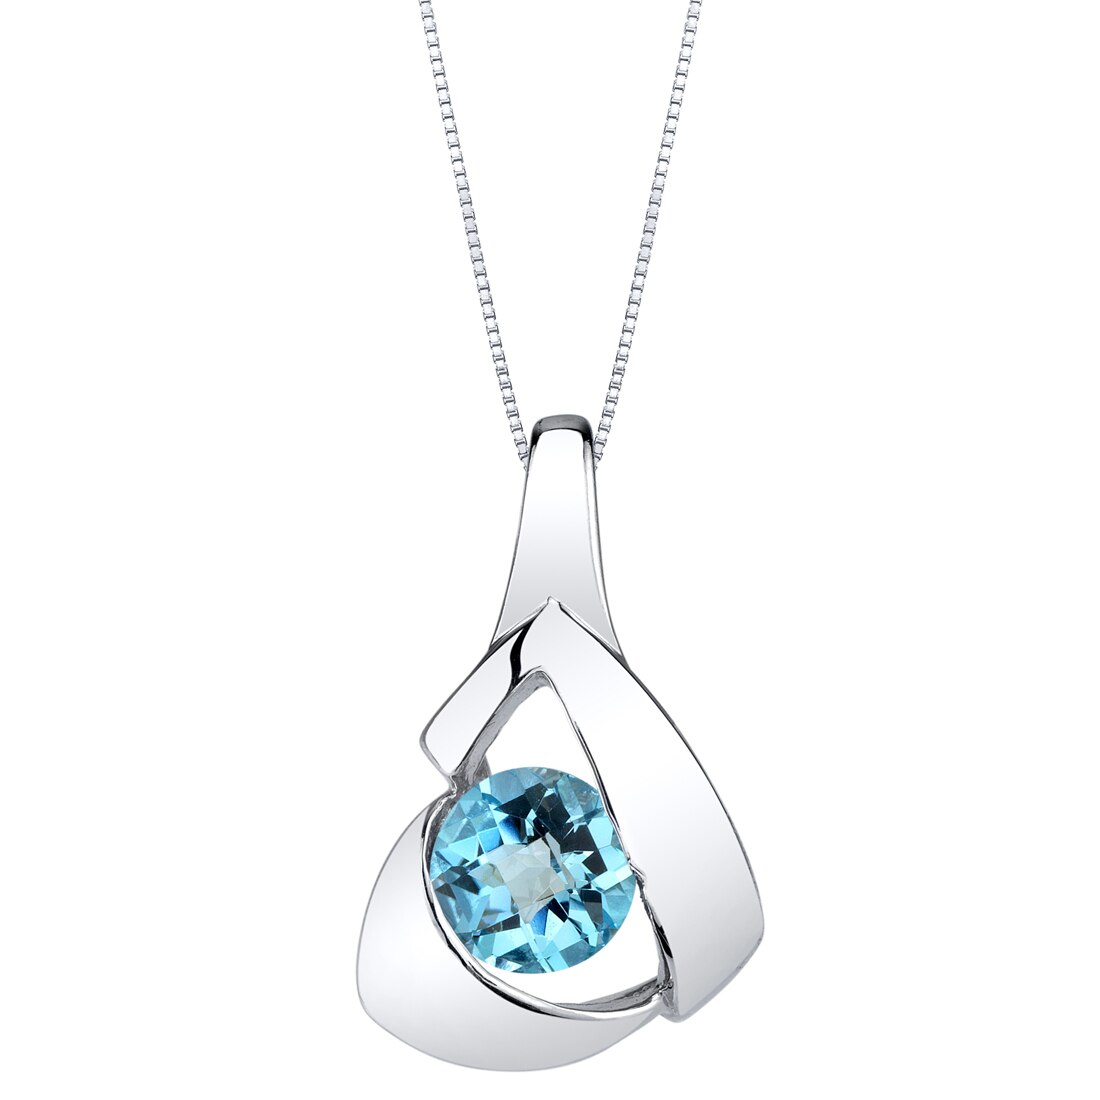 Blue Topaz Pendant 925 Solid Sterling Silver Pendant Cushion